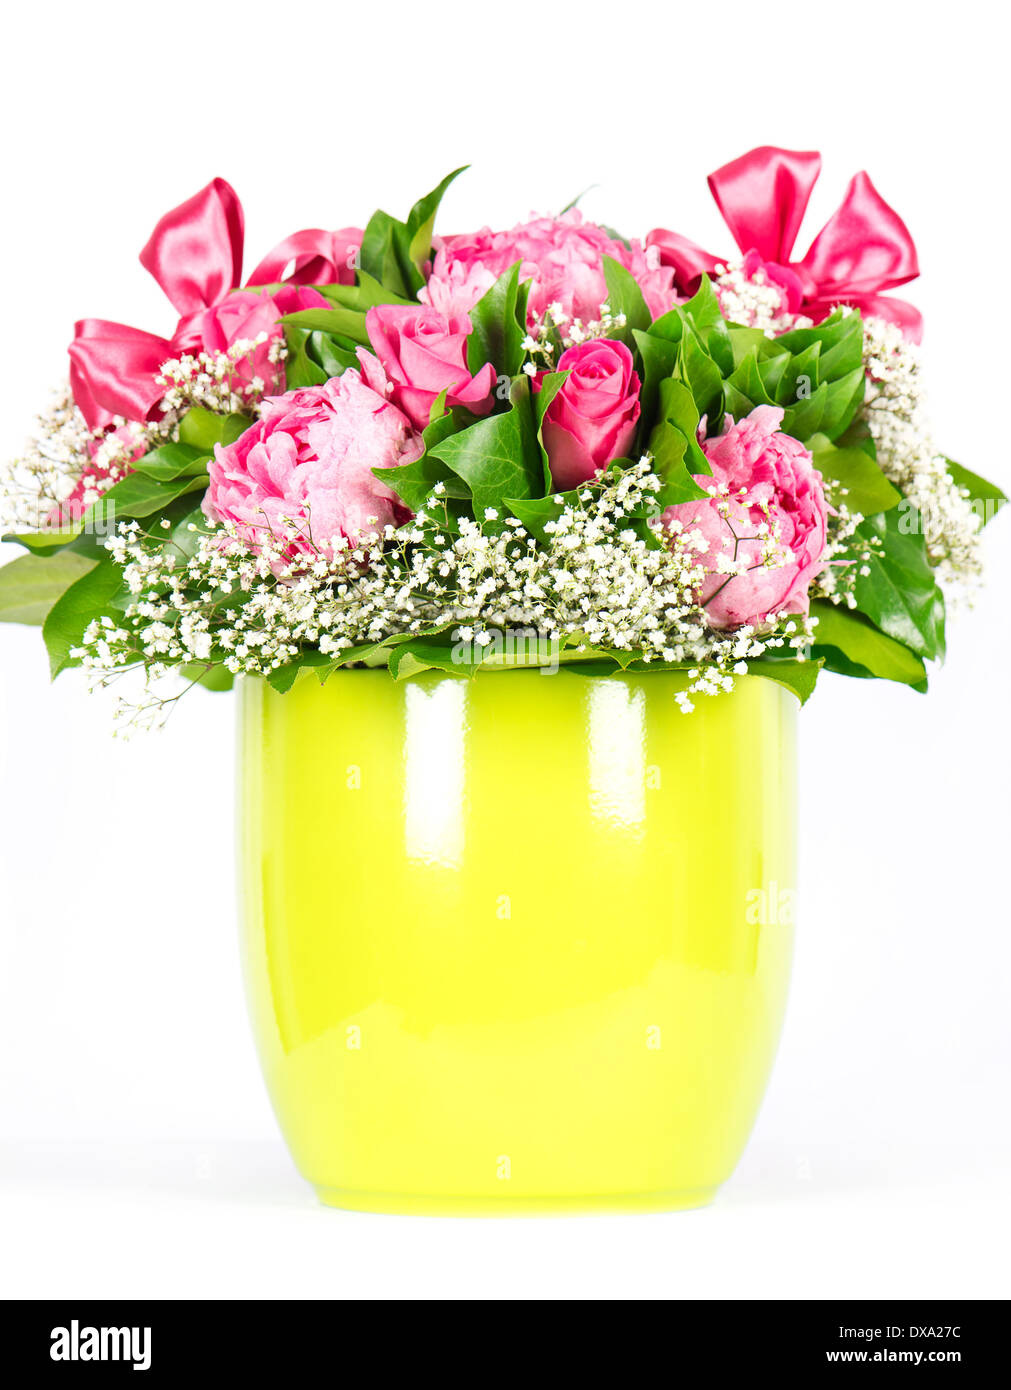 colorful flowers bouquet with pink ribbon Stock Photo